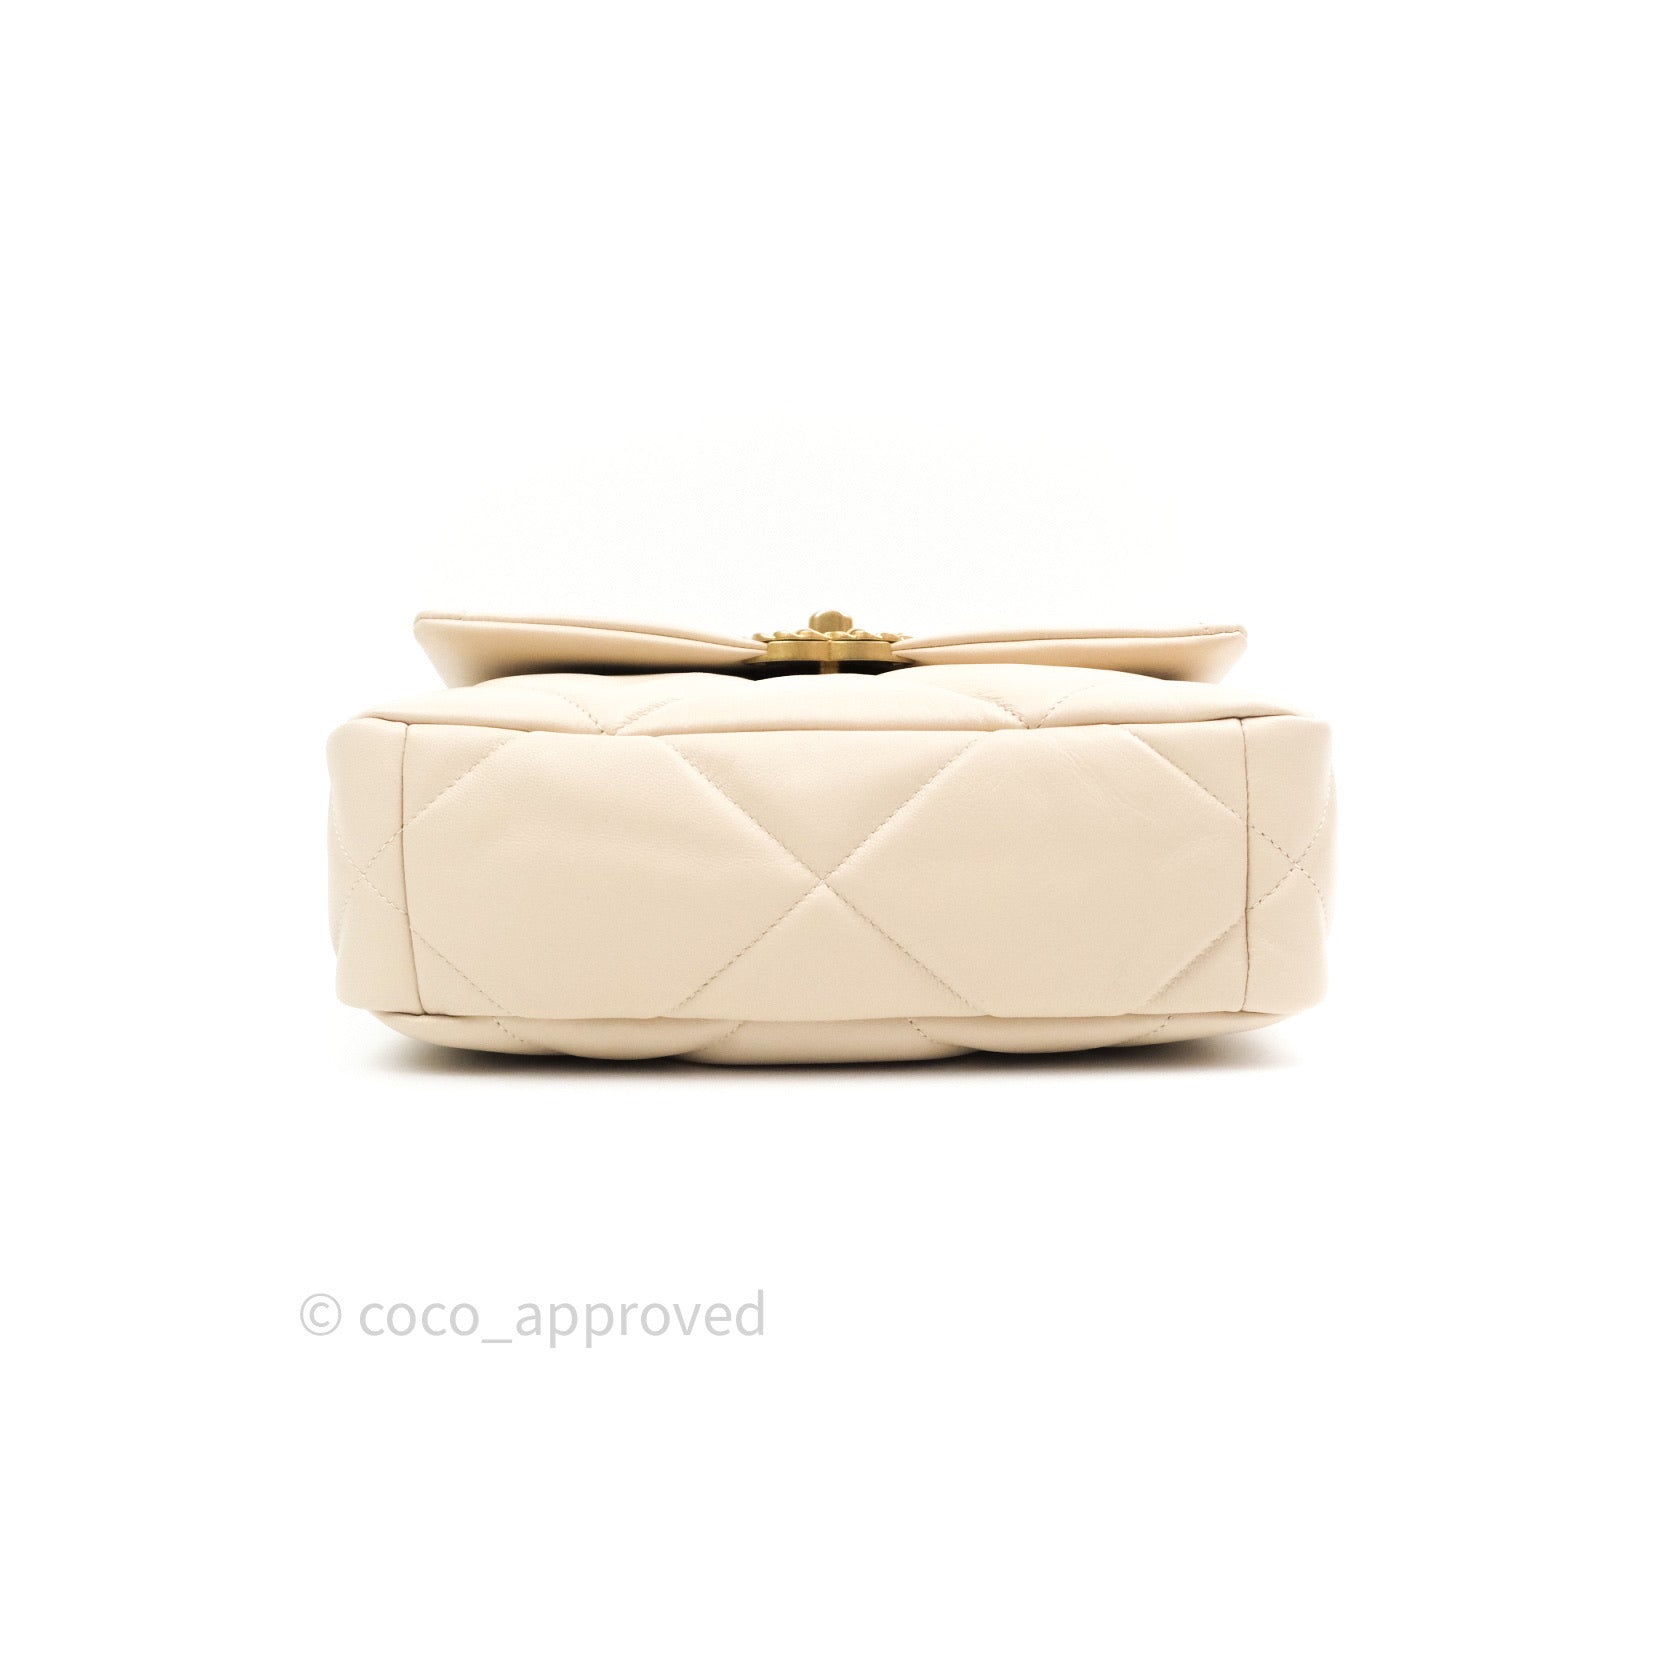 Chanel 19 Small Beige Goatskin Mixed Hardware 20B – Coco Approved